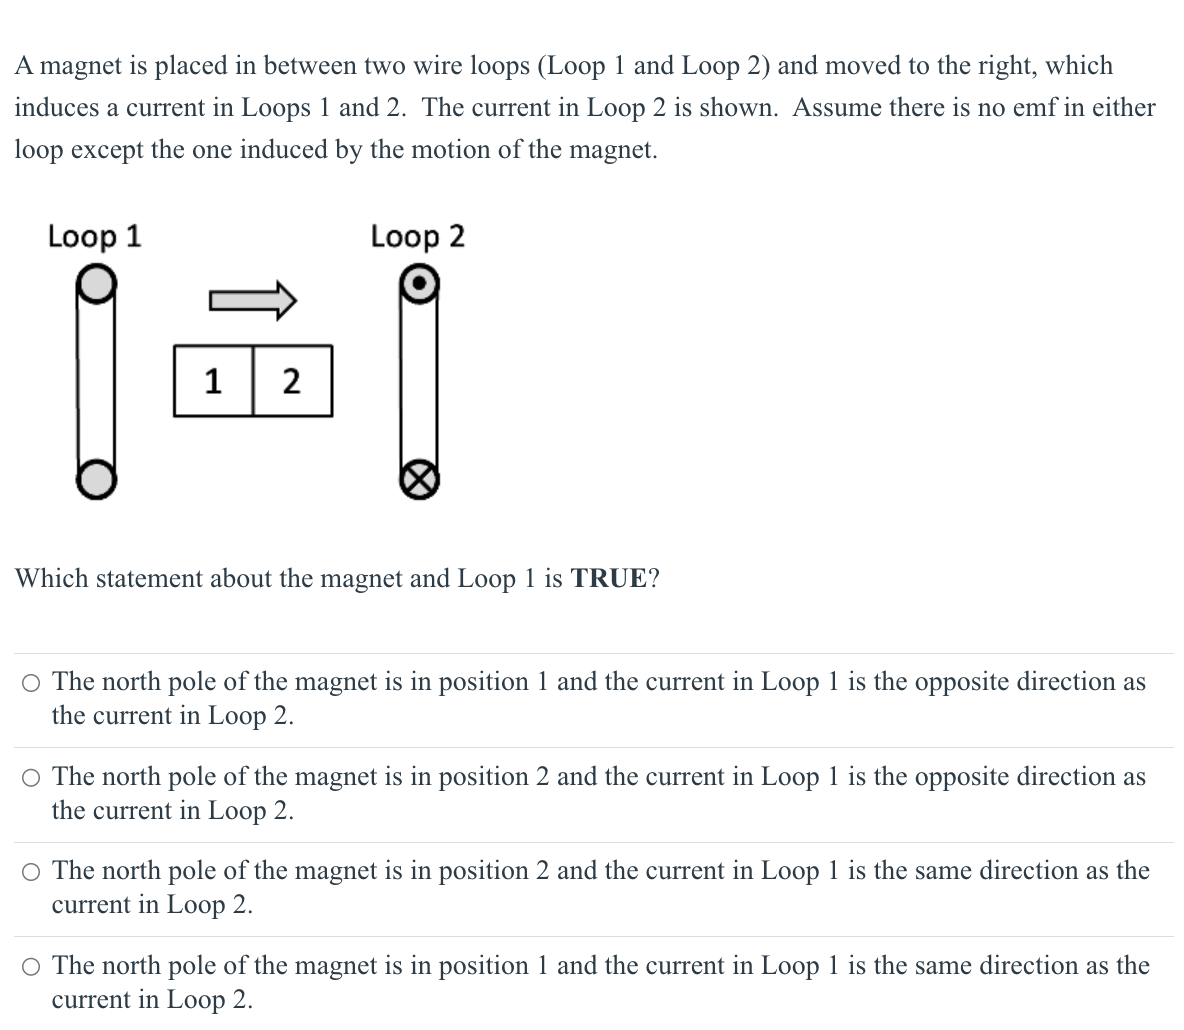 A magnet is placed in between two wire loops (Loop 1 and Loop 2) and moved to the right, which
induces a current in Loops 1 and 2. The current in Loop 2 is shown. Assume there is no emf in either
loop except the one induced by the motion of the magnet.
Loop 2
Loop 1
1 2
Which statement about the magnet and Loop 1 is TRUE?
O The north pole of the magnet is in position 1 and the current in Loop 1 is the opposite direction as
the current in Loop 2.
○ The north pole of the magnet is in position 2 and the current in Loop 1 is the opposite direction as
the current in Loop 2.
O The north pole of the magnet is in position 2 and the current in Loop 1 is the same direction as the
current in Loop 2.
○ The north pole of the magnet is in position 1 and the current in Loop 1 is the same direction as the
current in Loop 2.